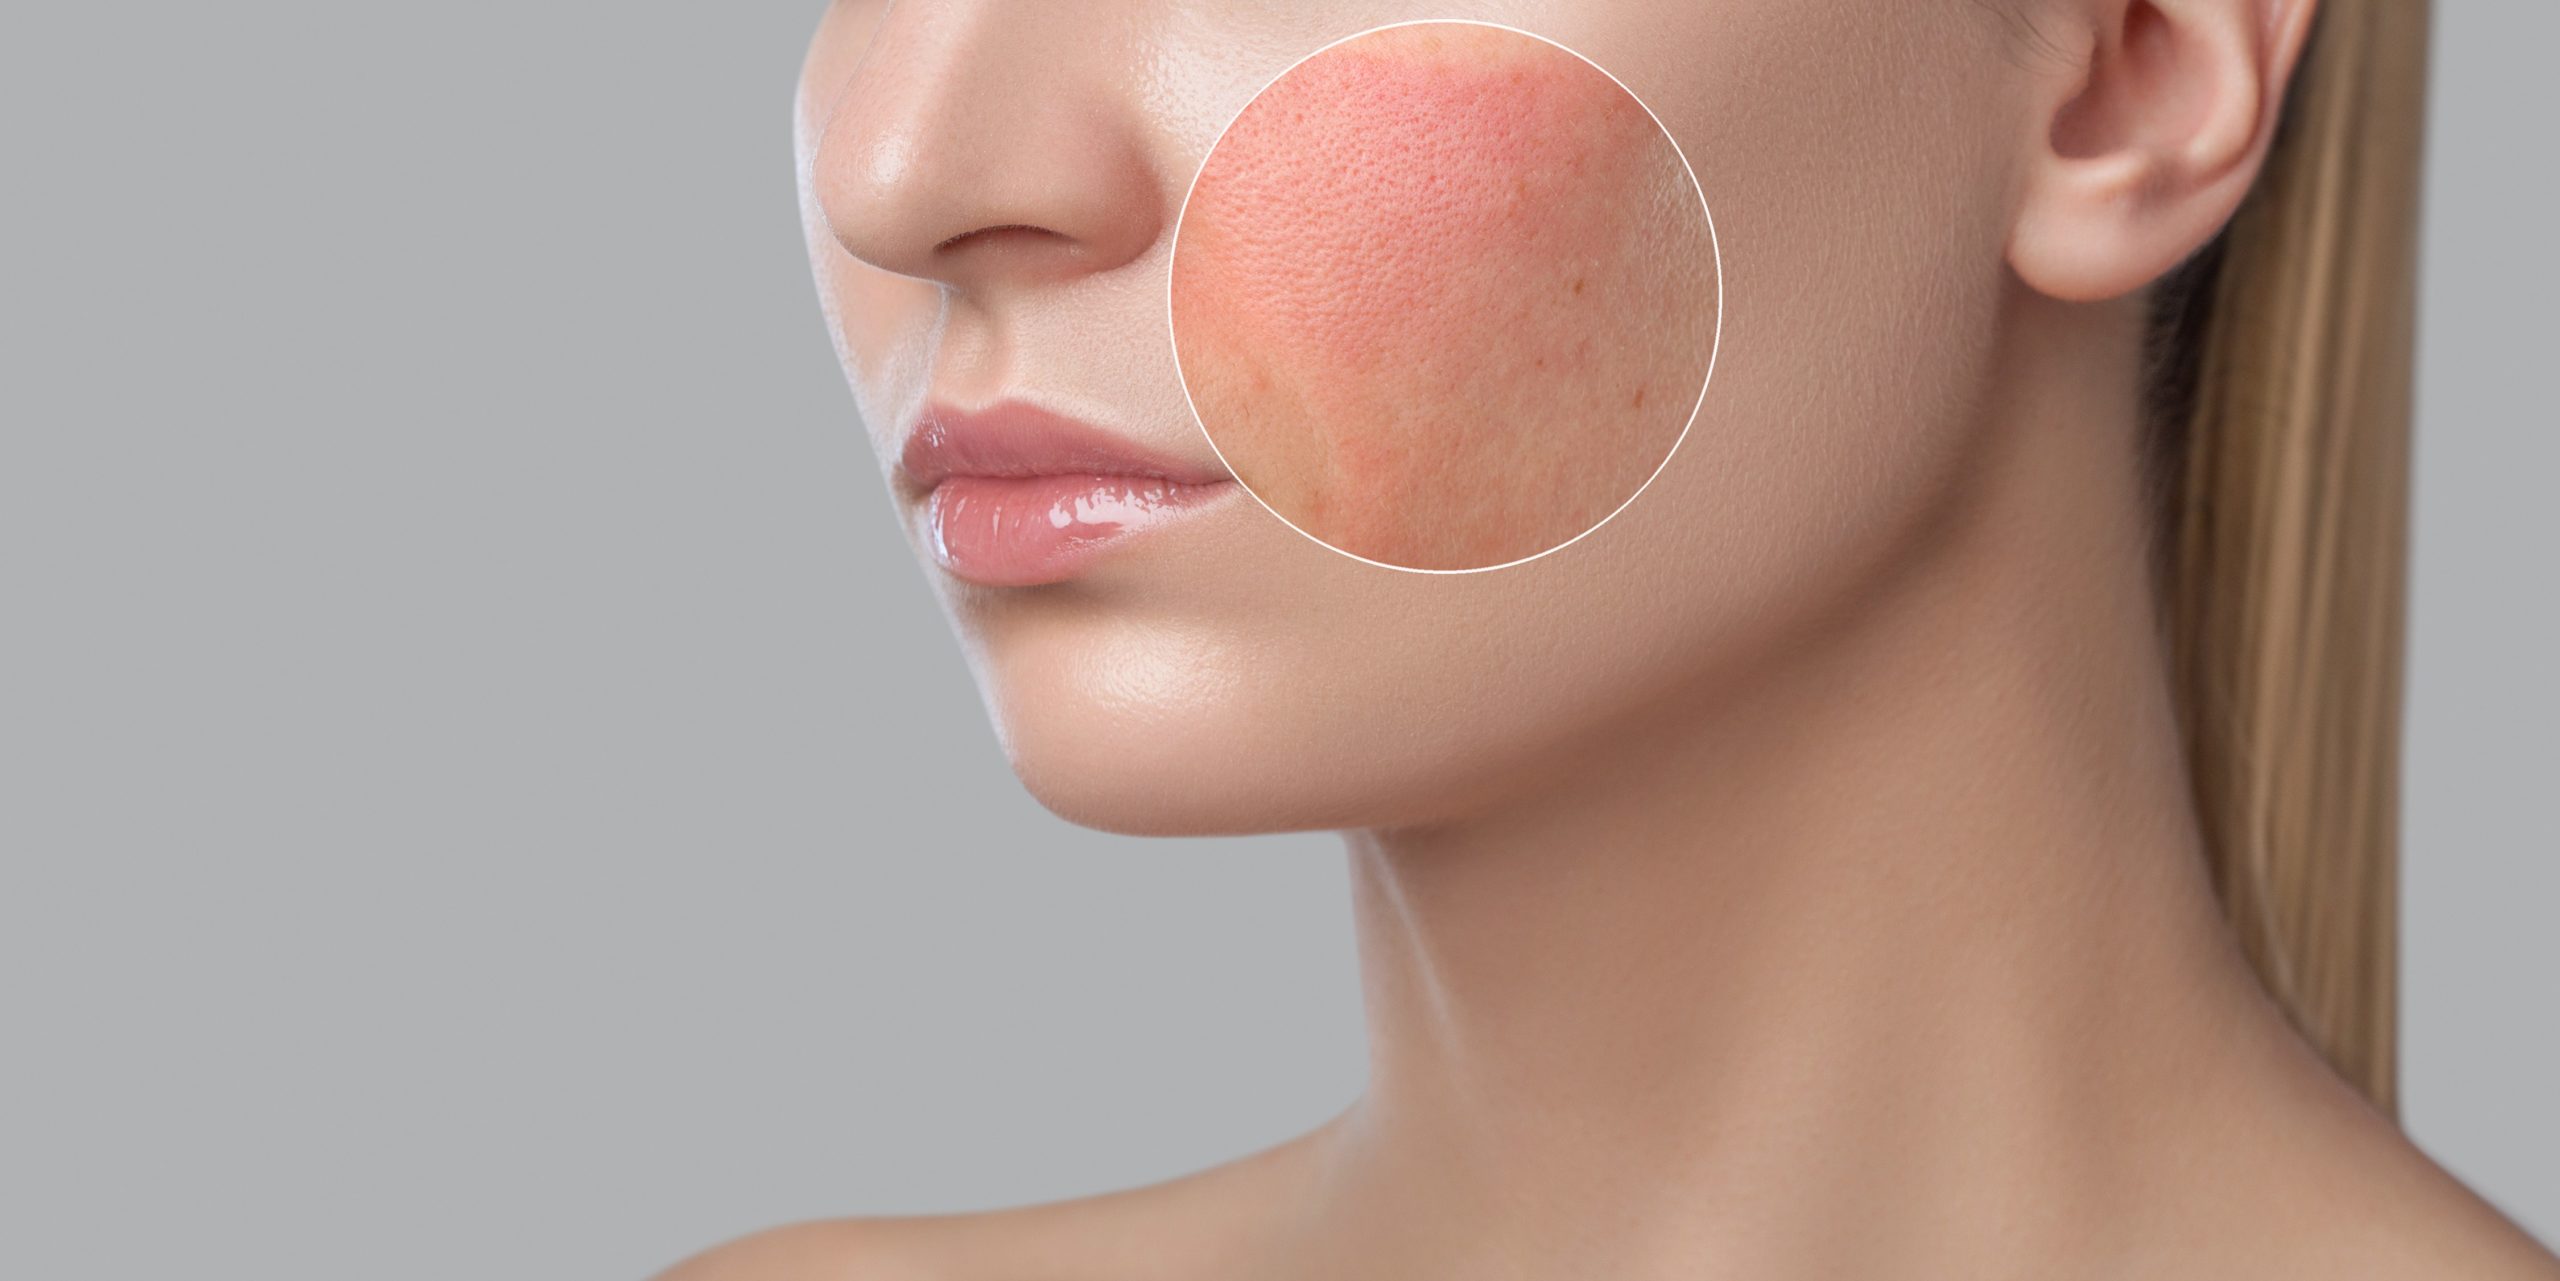 Woman having Rashes on her cheeks | Lutronic Ultra Laser at Arabella Medical Aesthetics in Knoxville, TN